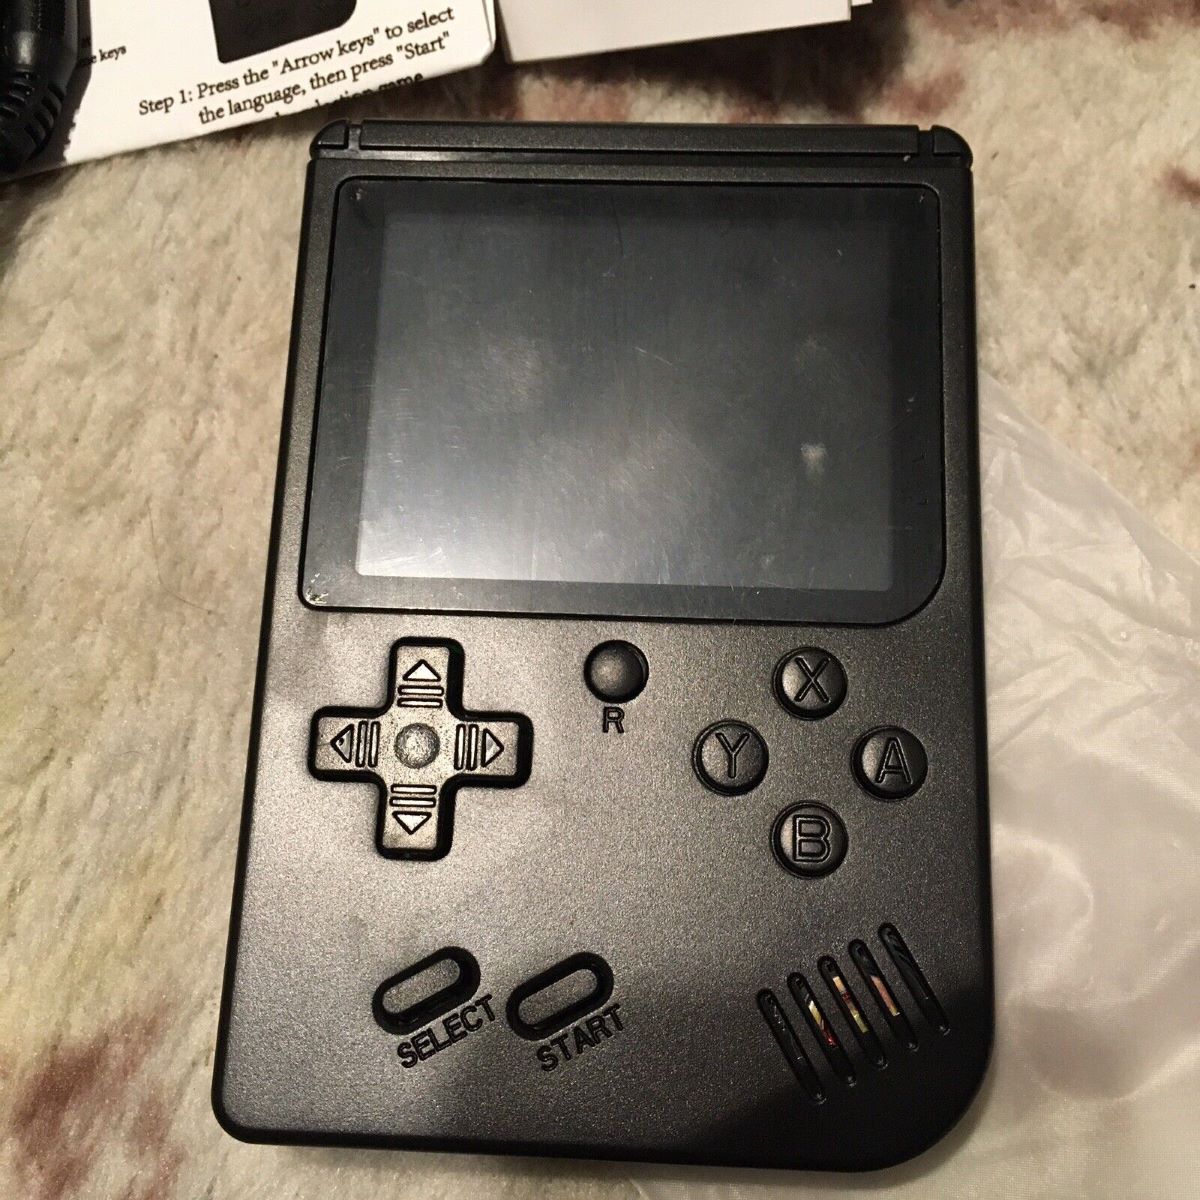 what-games-are-on-the-weikin-handheld-game-controller